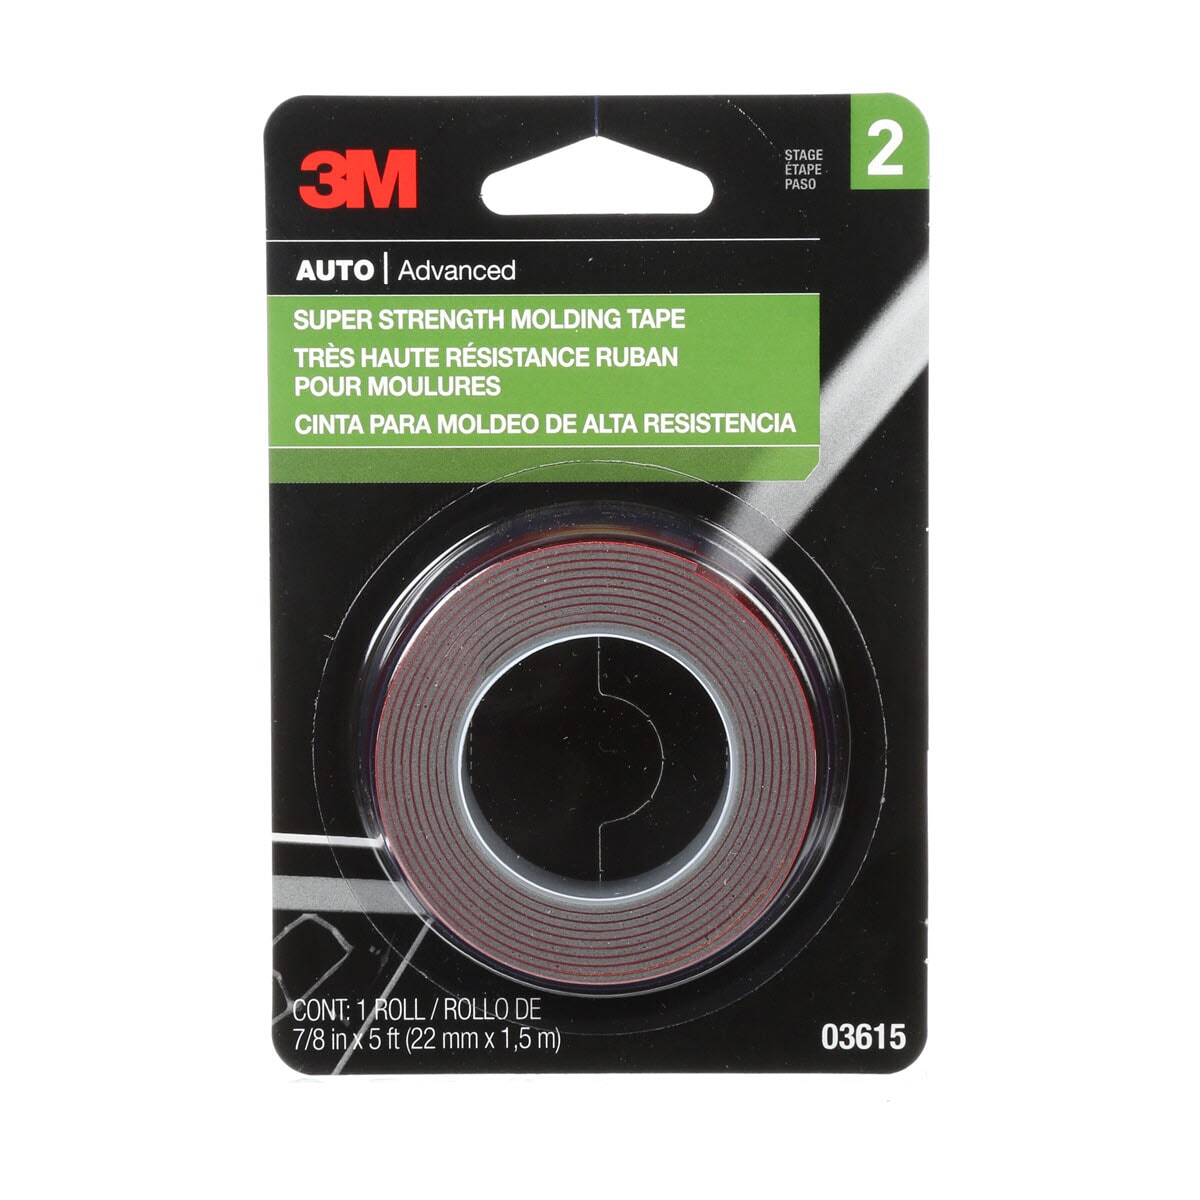 3M 7000000531 Super Strength Molding Tape, 5 ft L x 7/8 in W, 0.045 in THK, Acrylic Adhesive, Black